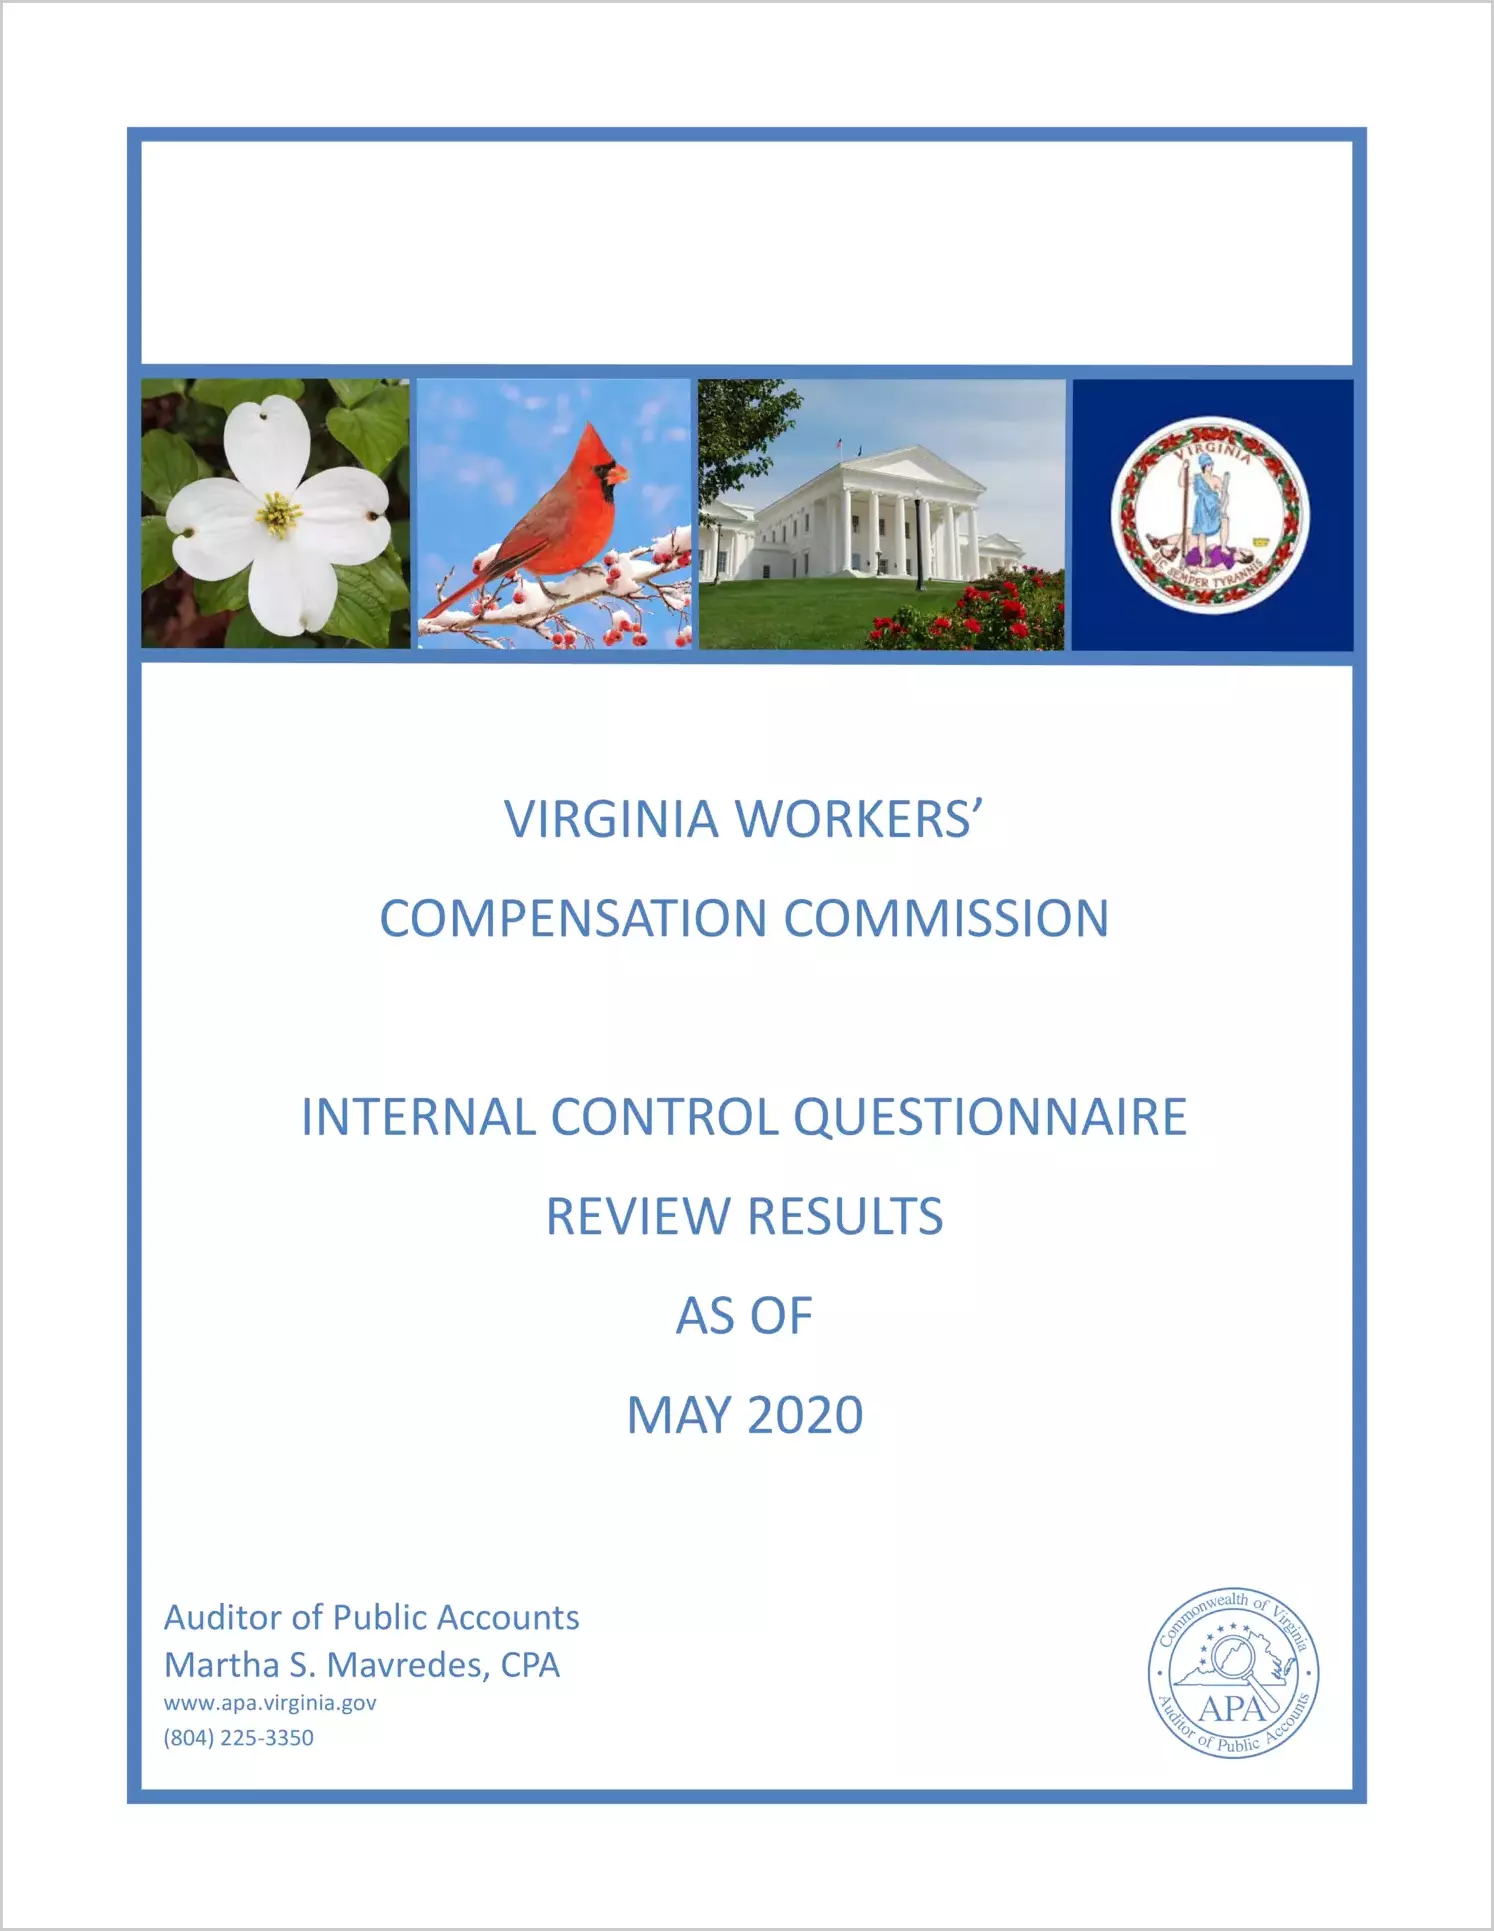 Virginia Worker's Compensation Commission Internal Control Questionnaire Review Results as of May 2020